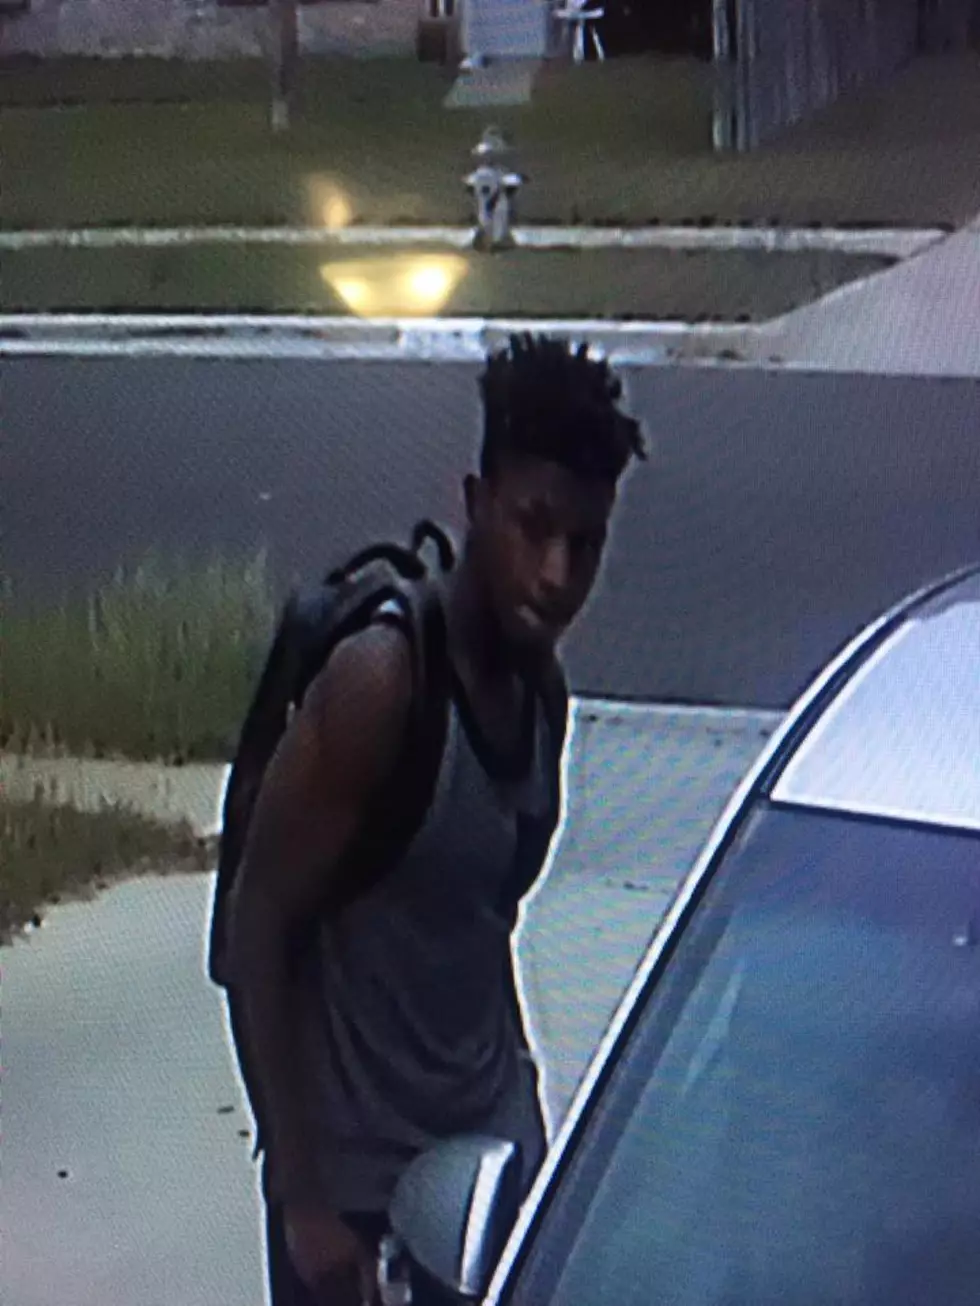 Killeen Residents Security Camera Captures Attempted Break-In